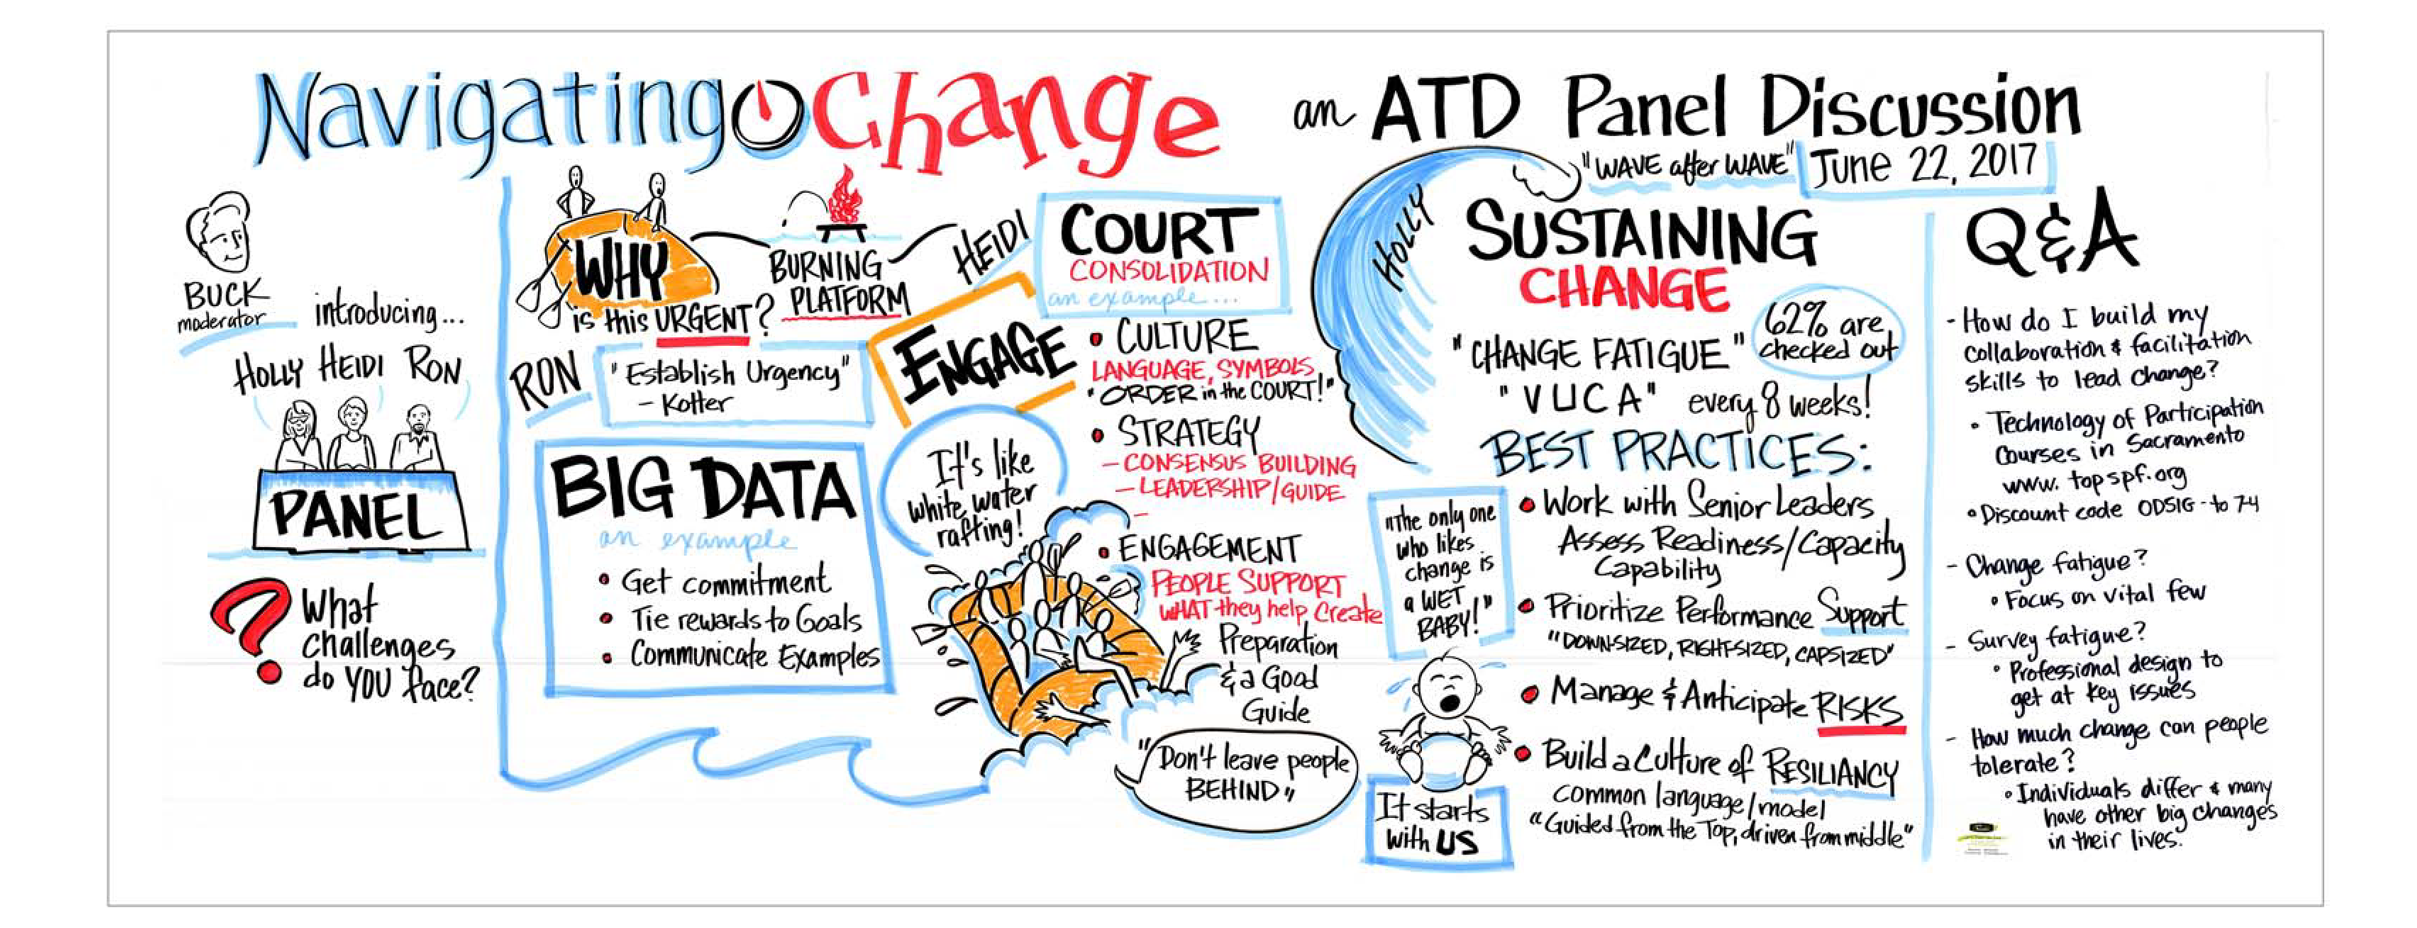 ATD Waves of Change